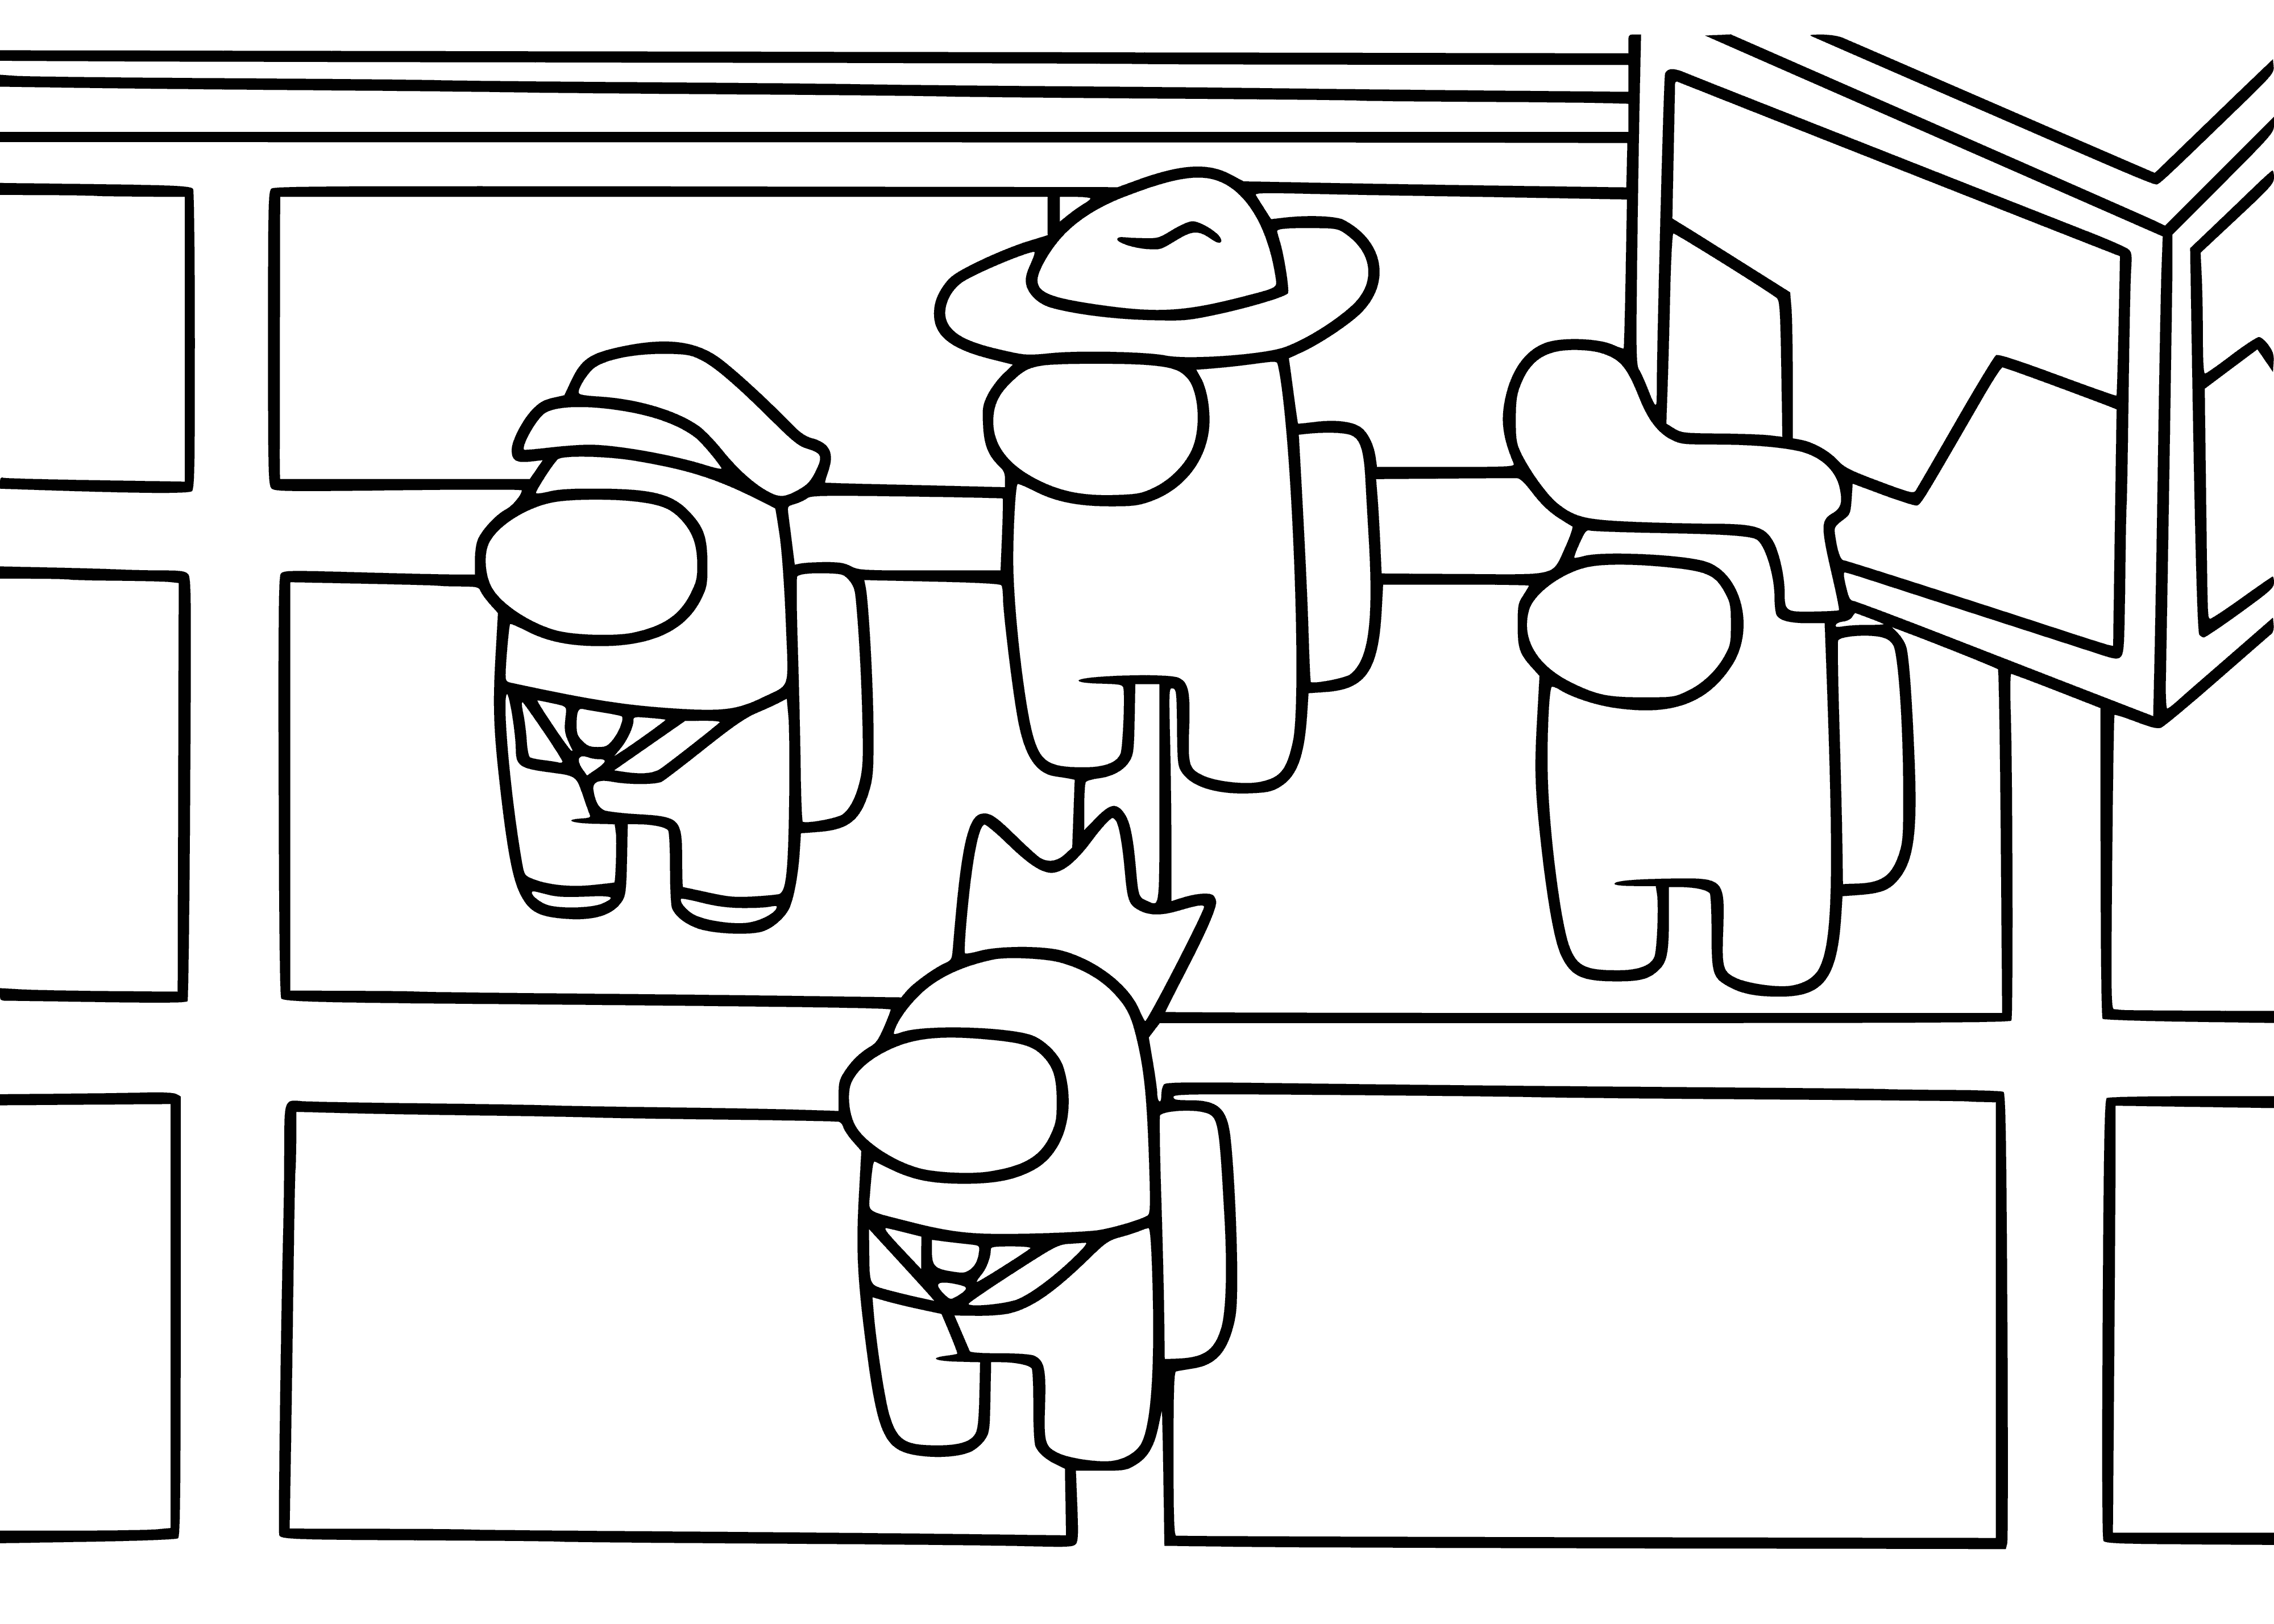 coloring page: People in spacesuits ready for mission; window shows a view of space.